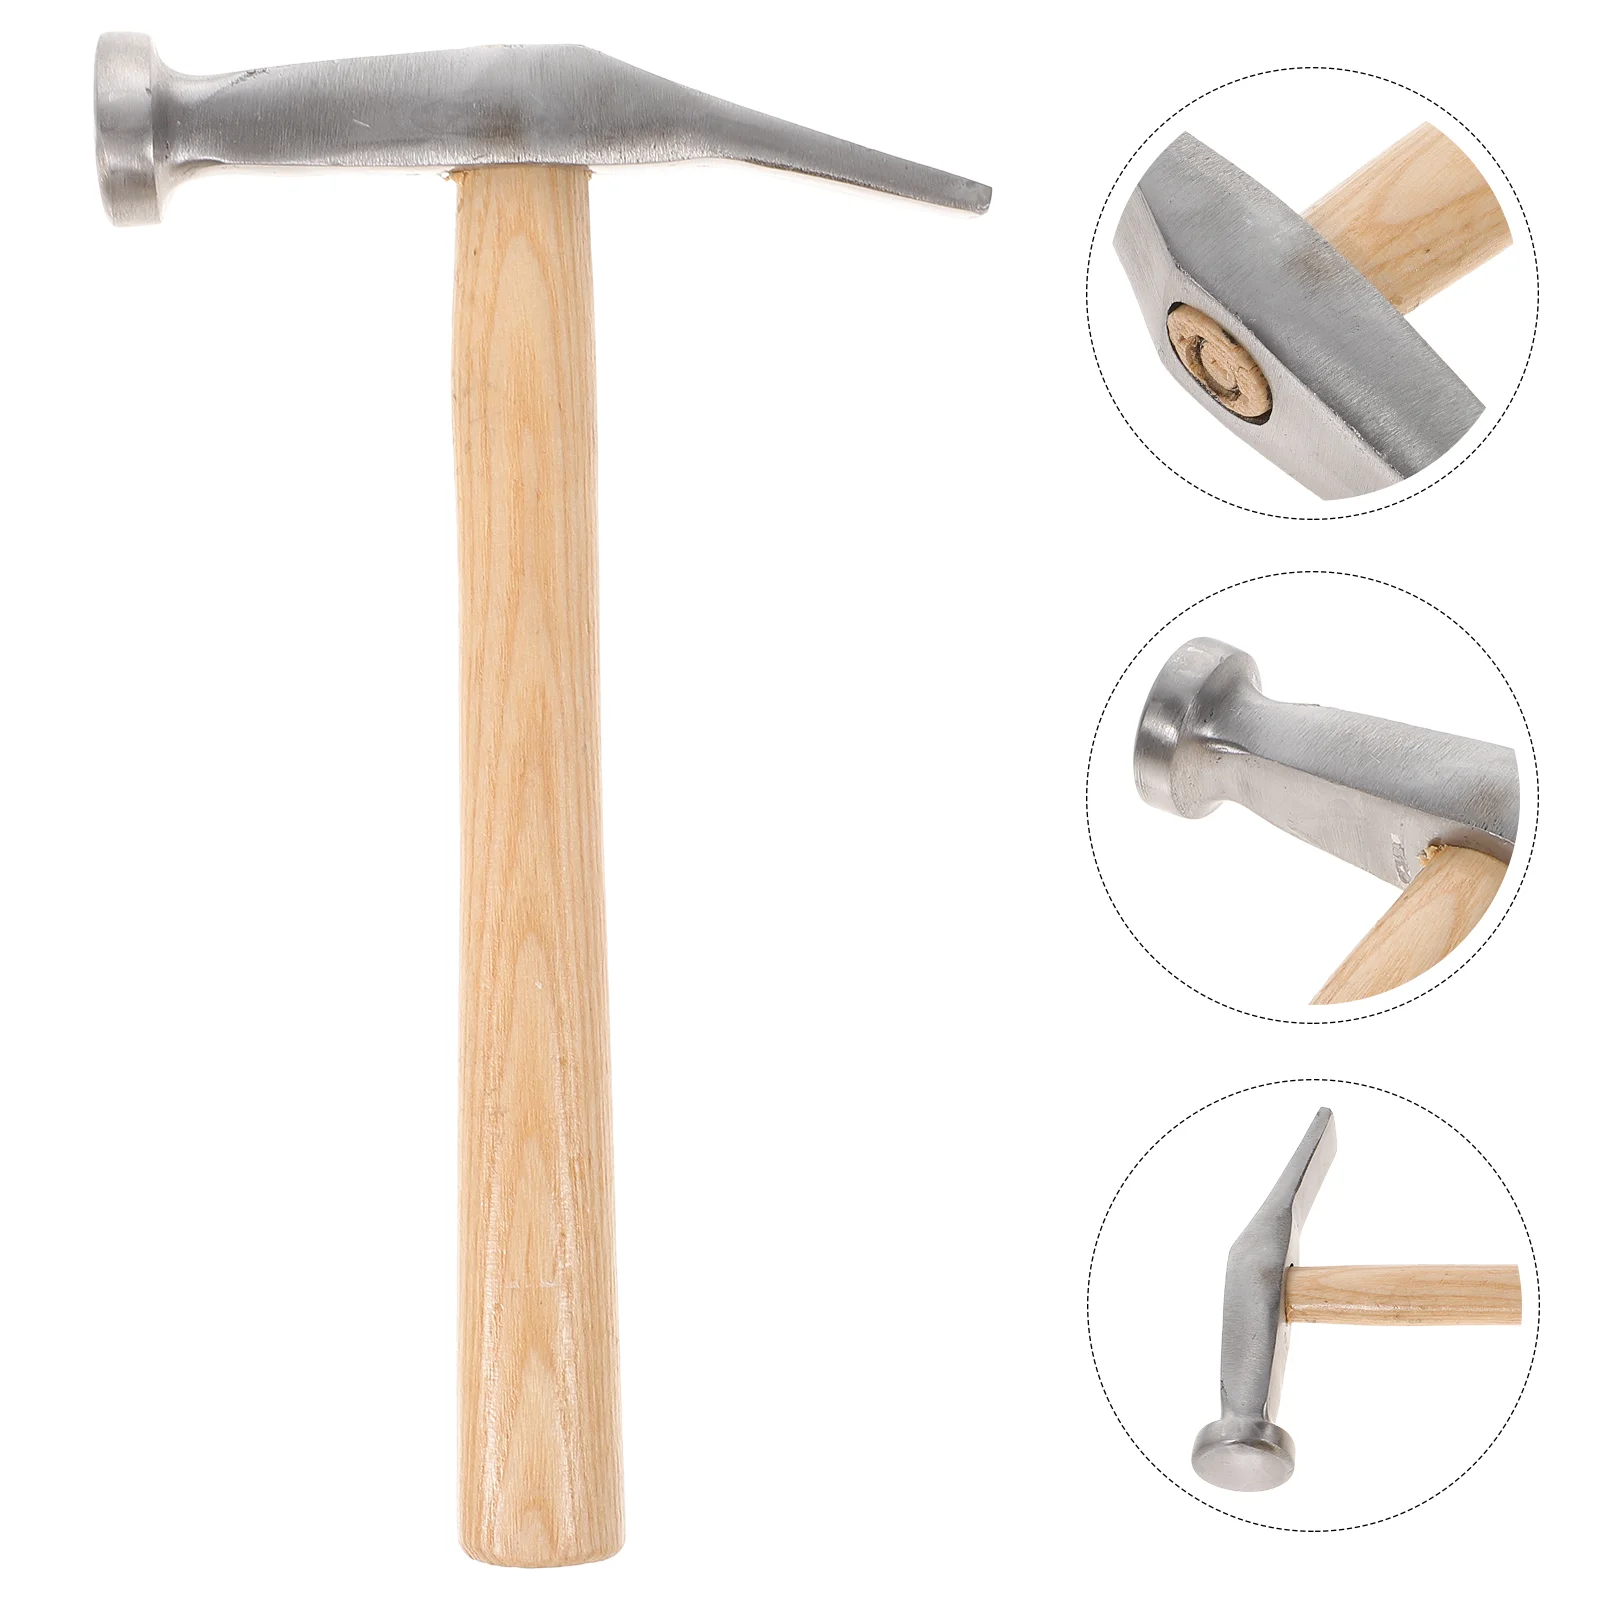 

Hammer Mallet Shoe Working Repair Shoes Wooden Handle Steel Tool Making Brass Claw Machinist Hammers Tools Leathercraft Carbon